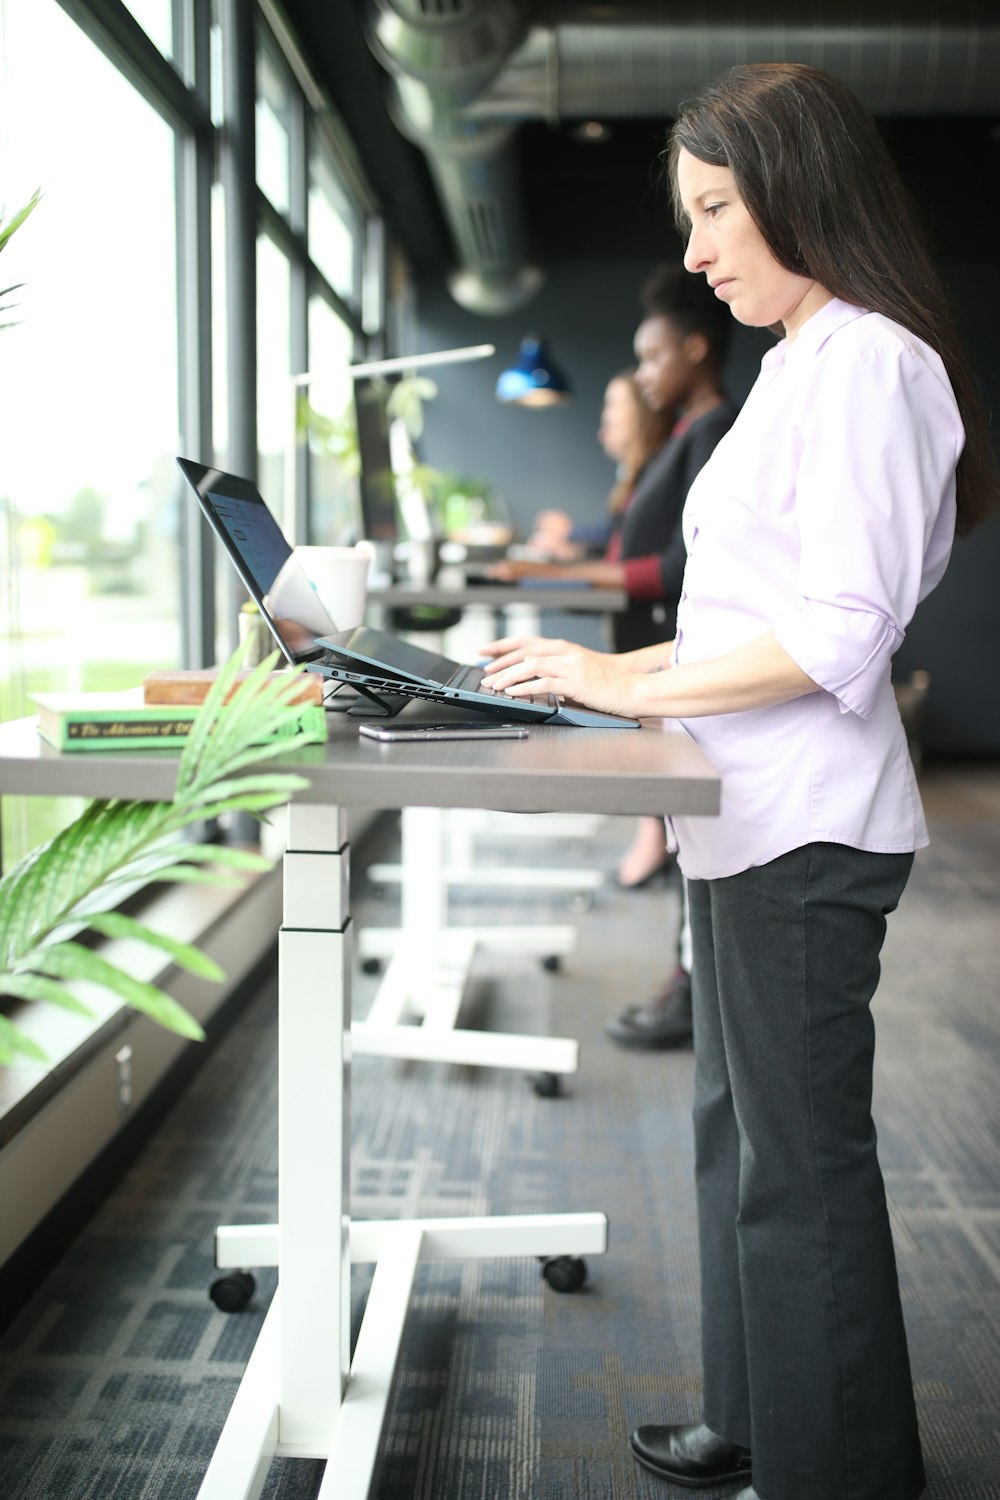 a woman standing at a table using a laptop computer